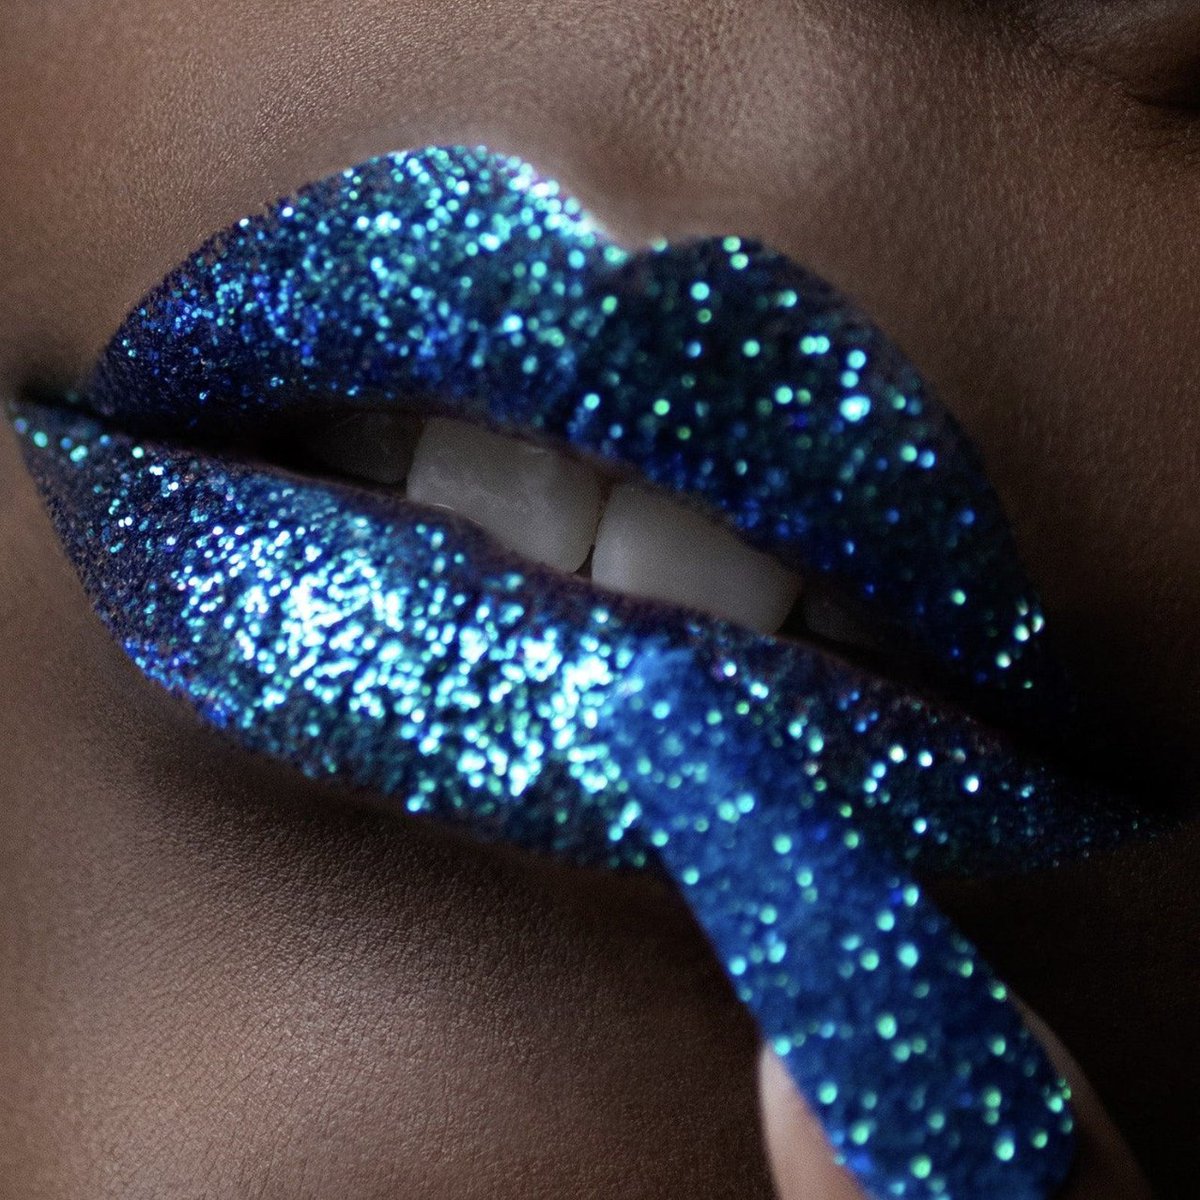 Glitter lips in Atlantis Chrome will turn you into the St Patrick's Day queen. Plus, it'll last all night - no matter how many pints of Guinness you have! #glitterlips #stpatricksday #staygoldencosmetics #indiebeauty #blackownedbusiness #femalefounder